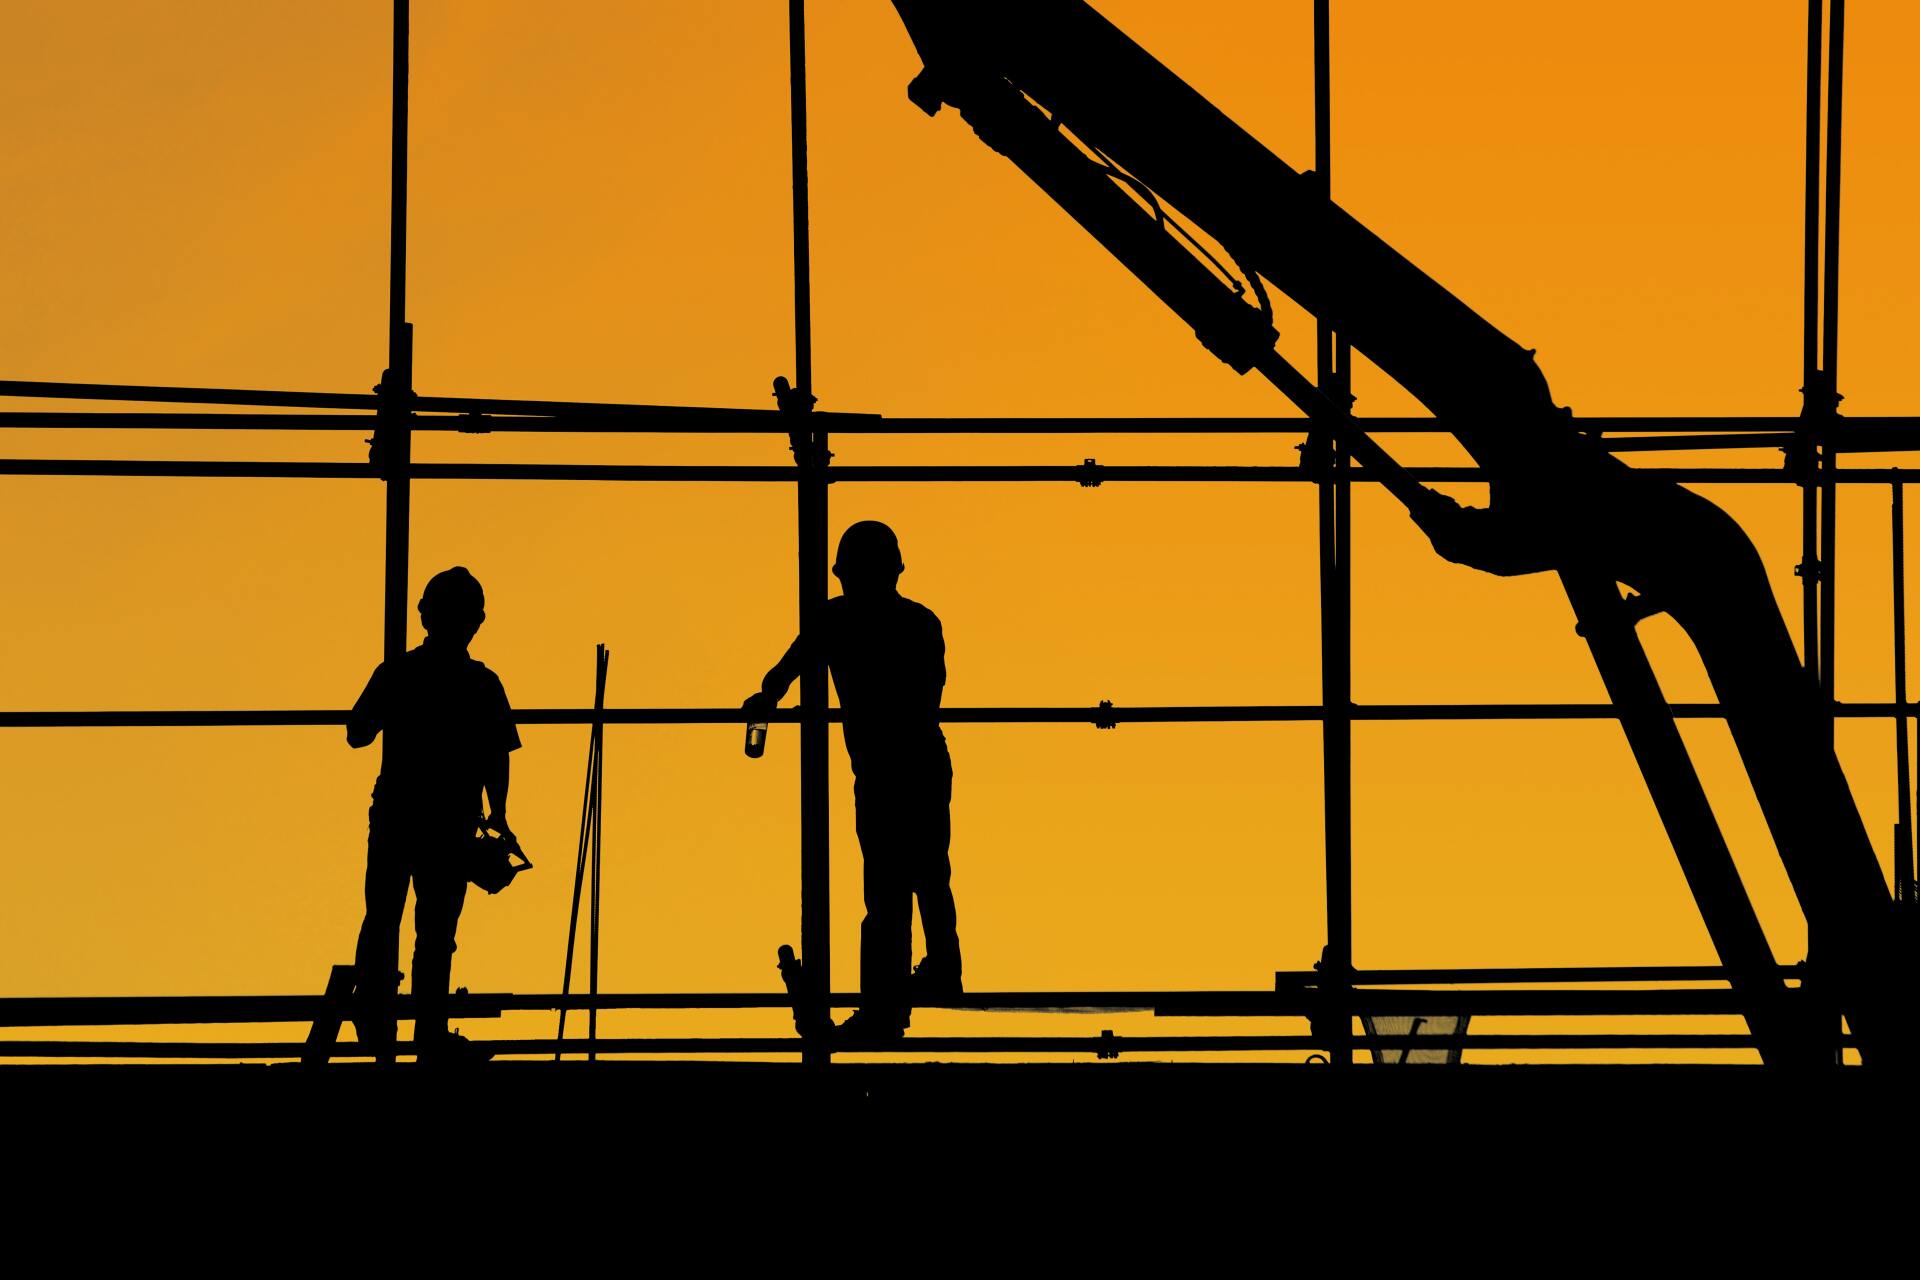 The silhouette of two construction workers wearing hard hats is shown against a orange background in a windowed construction scene. Pic Yancy Min via Unsplash.